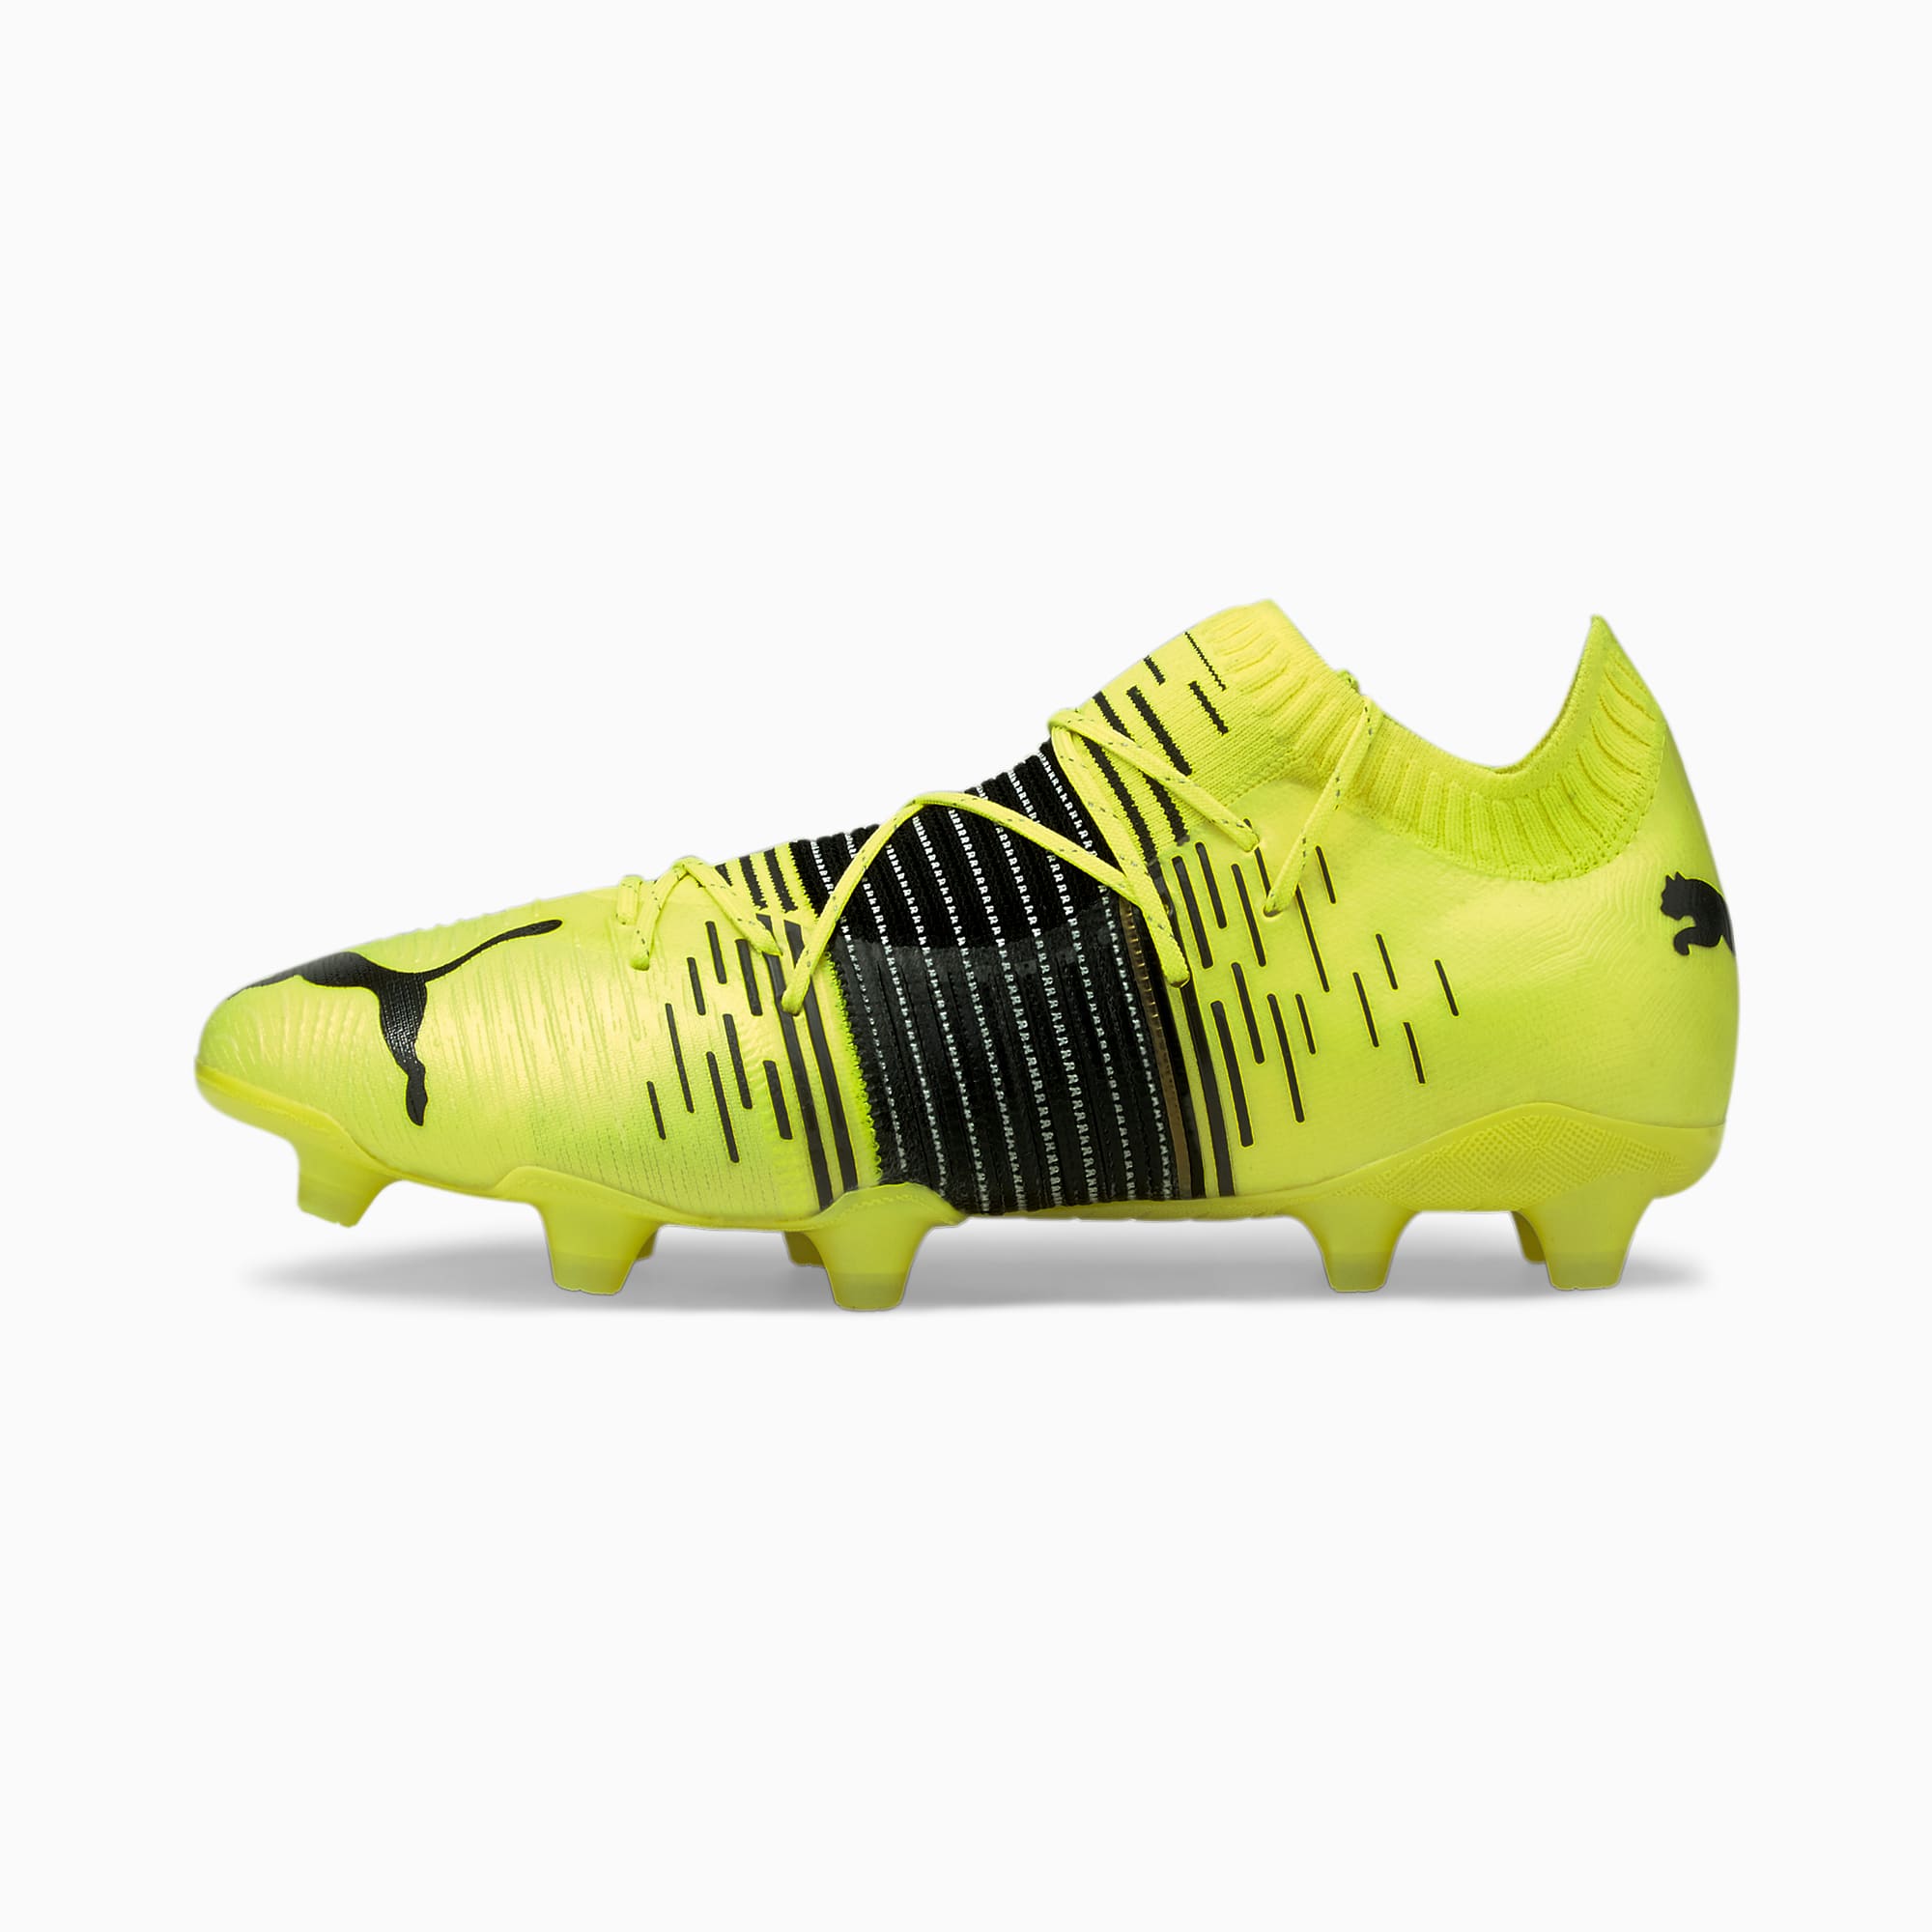 Puma Release Flare Pack - Light Up Your Game - Soccer Cleats 101